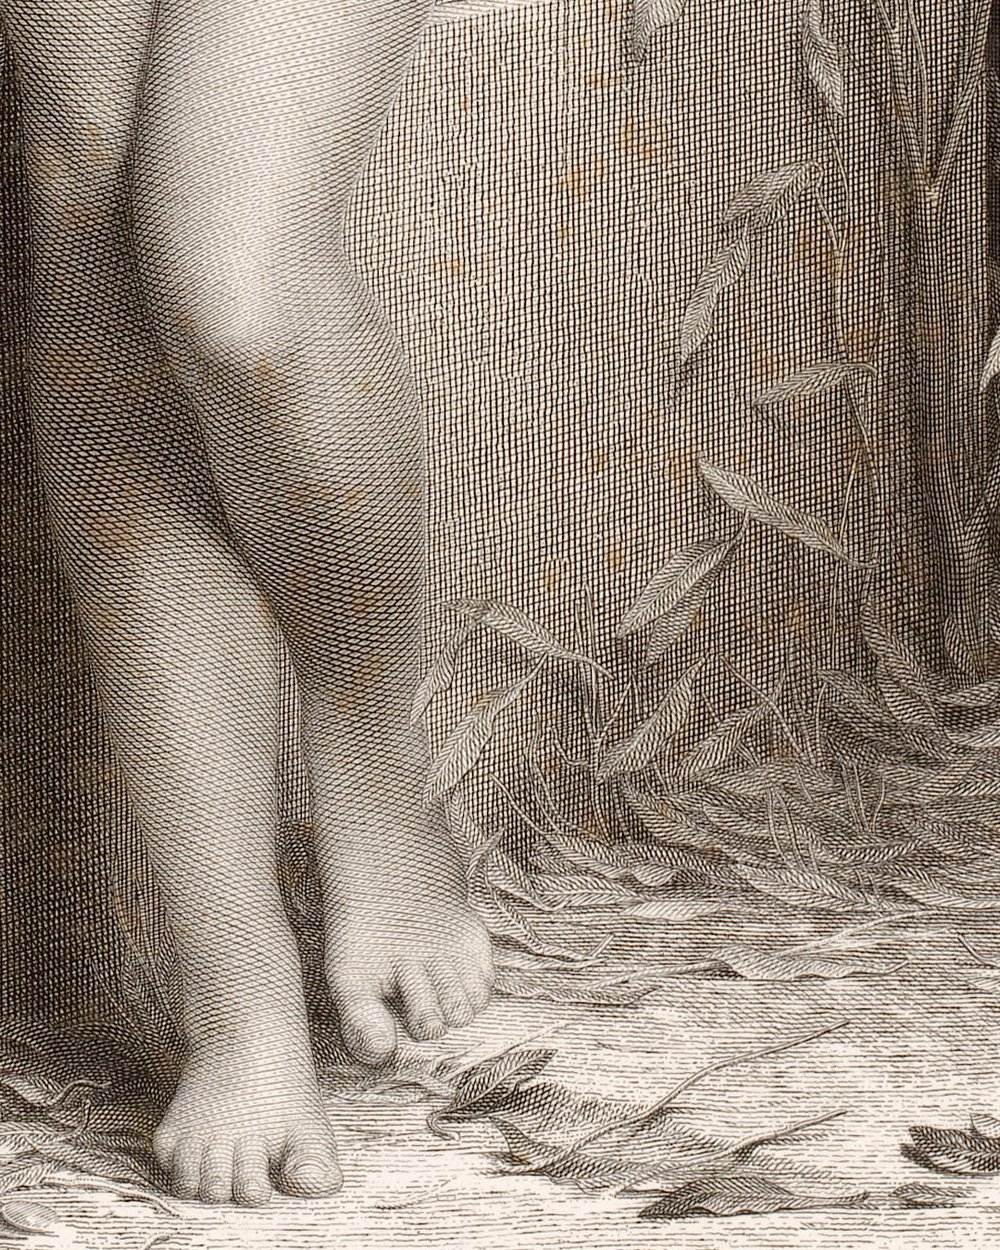 "Young naked woman as 'La Cigale'." (1874)